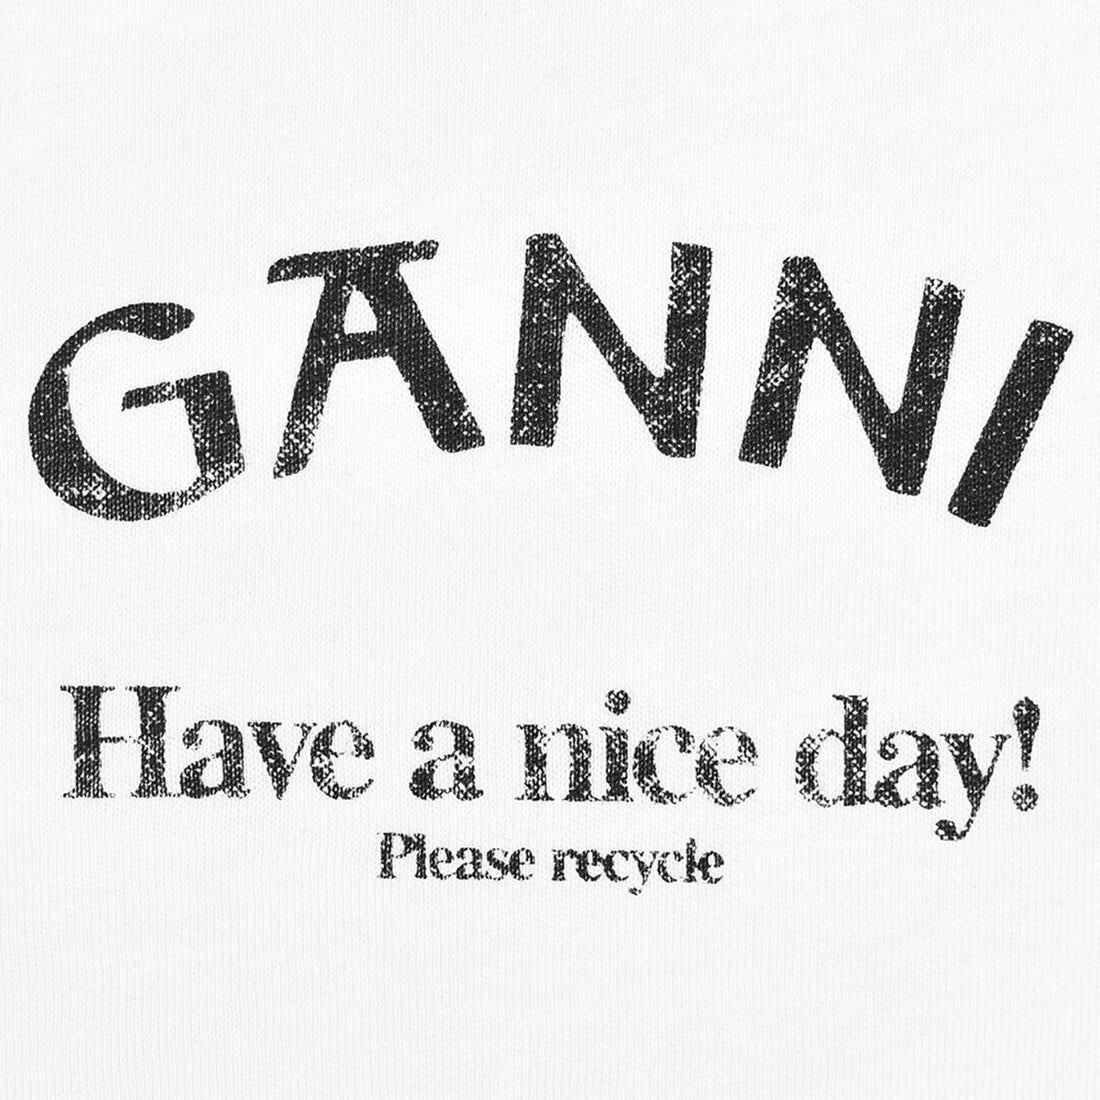 [GANNI]Thin Jersey Relaxed O-neck T-Shirt/WHITE(T3561)